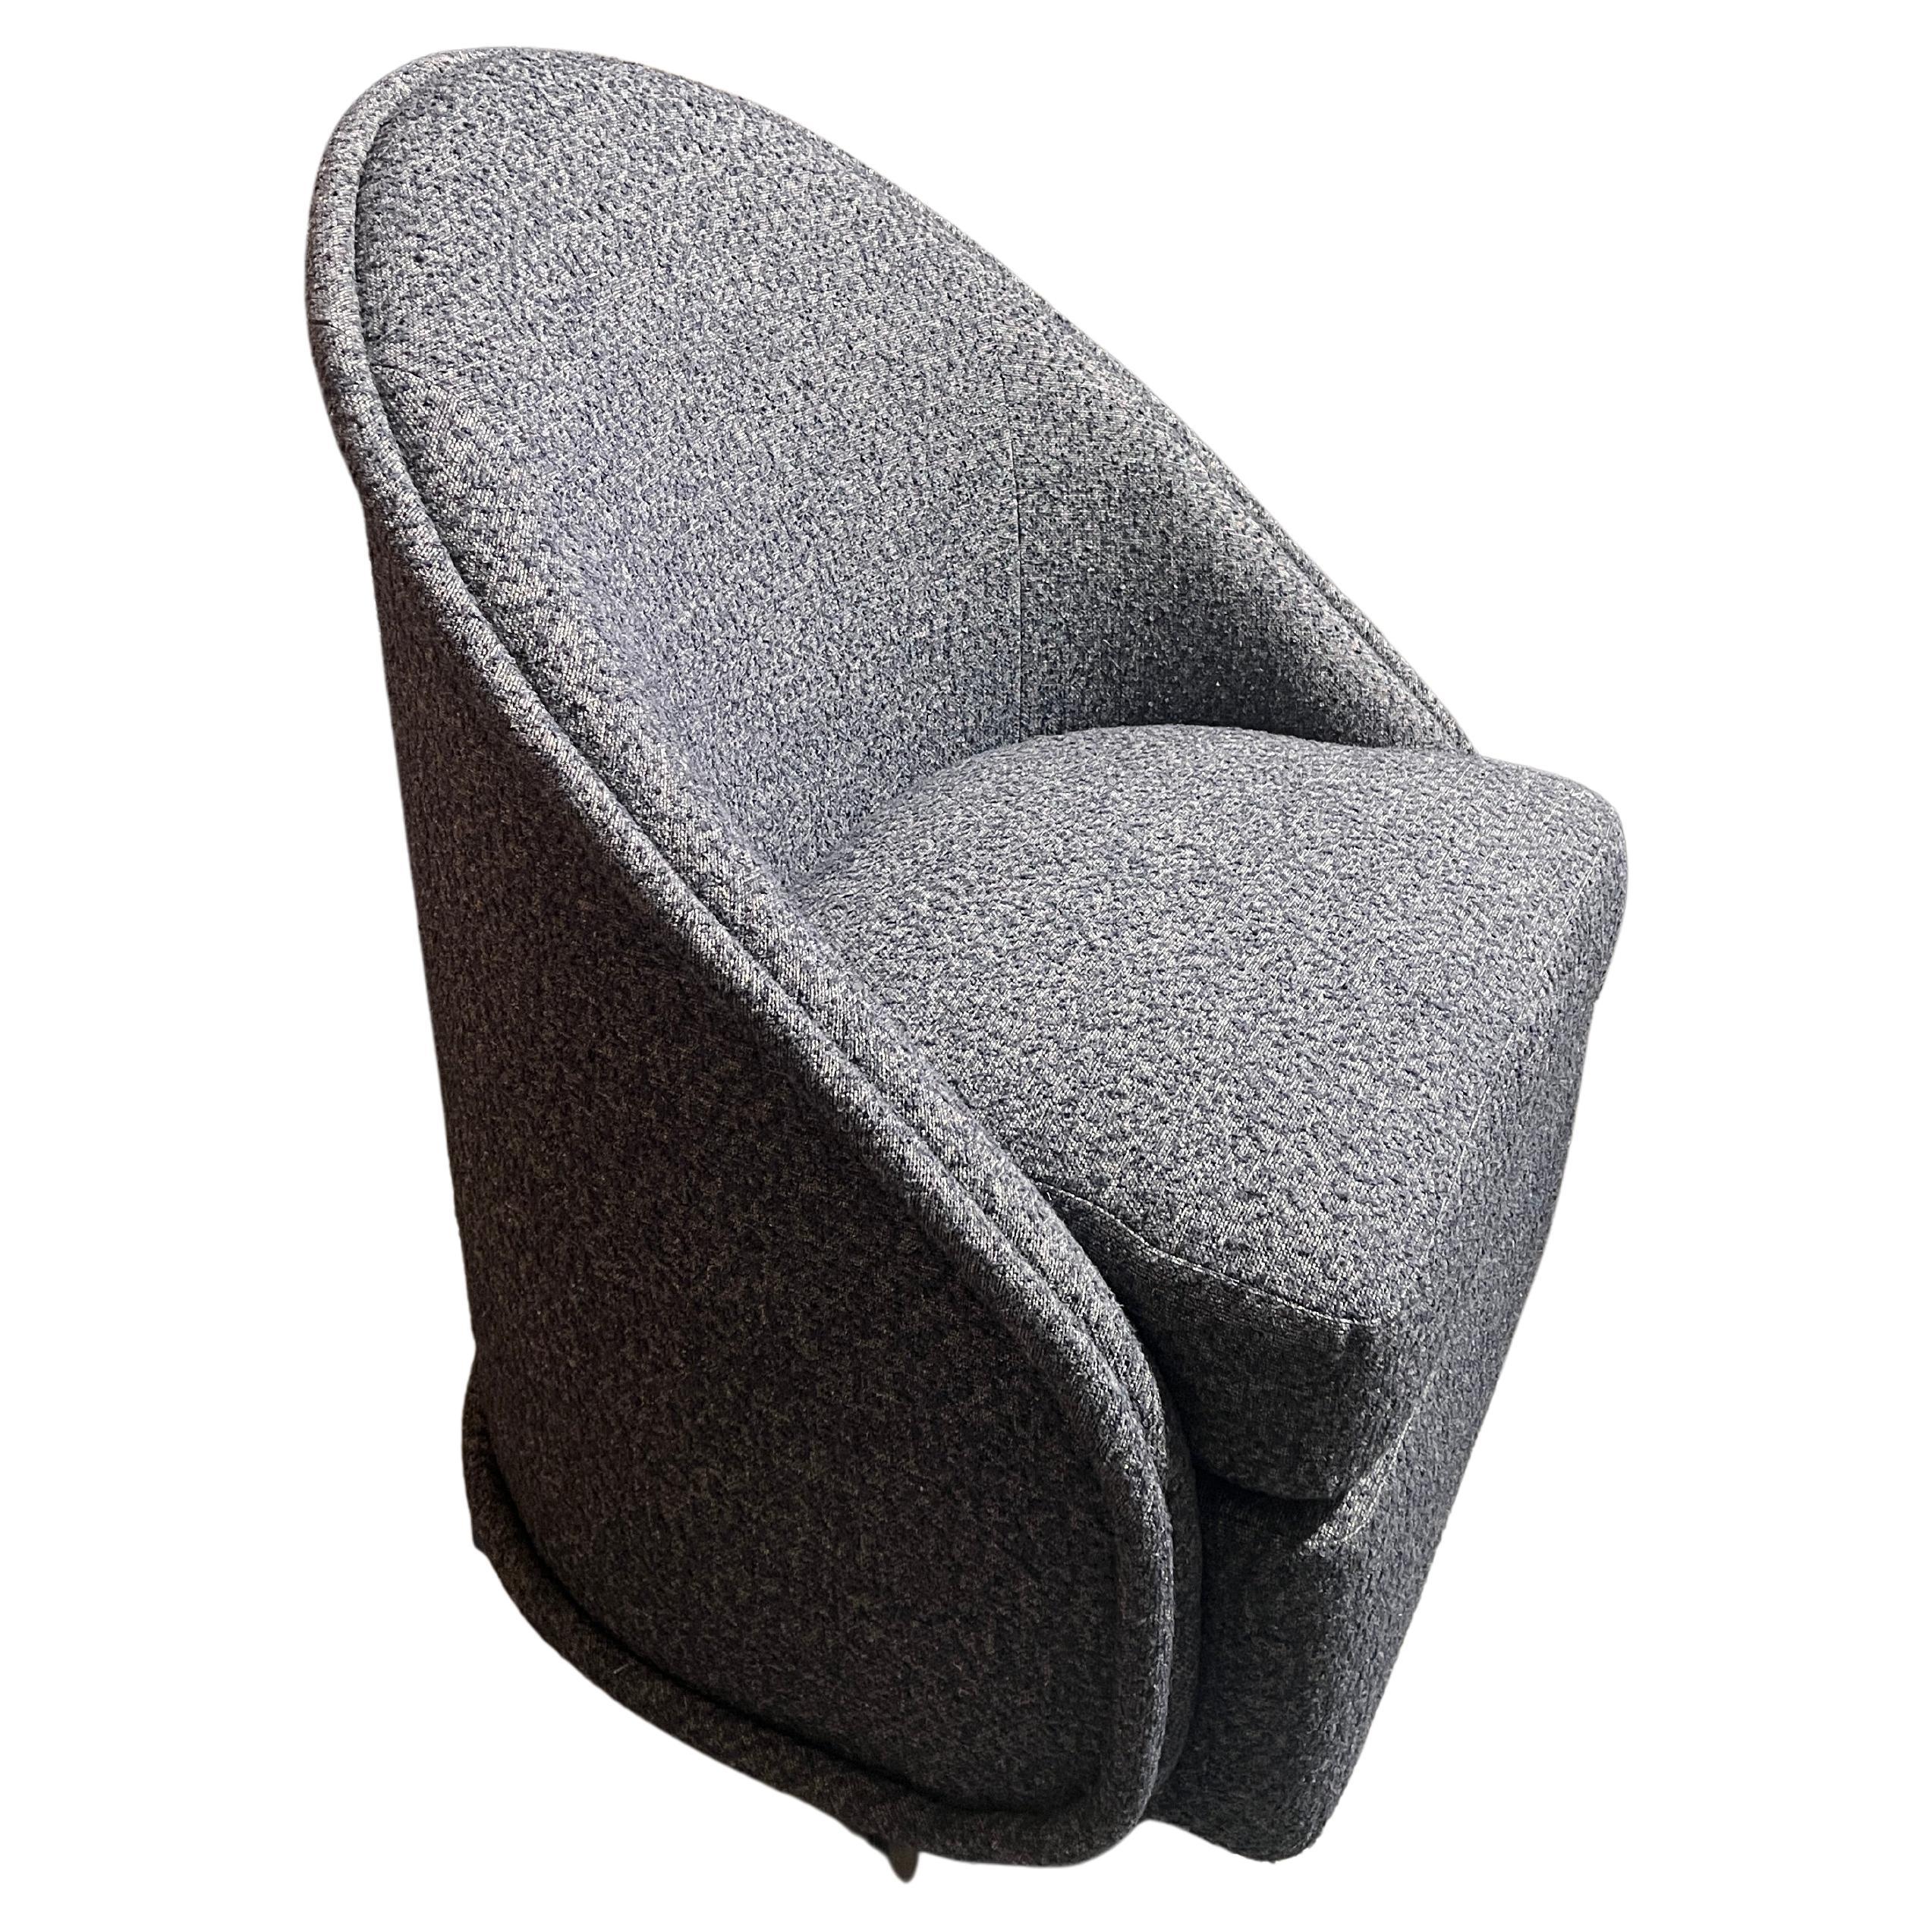 The Beak Swivel Chair Bespoke Size by Sister by Studio Ashby For Sale